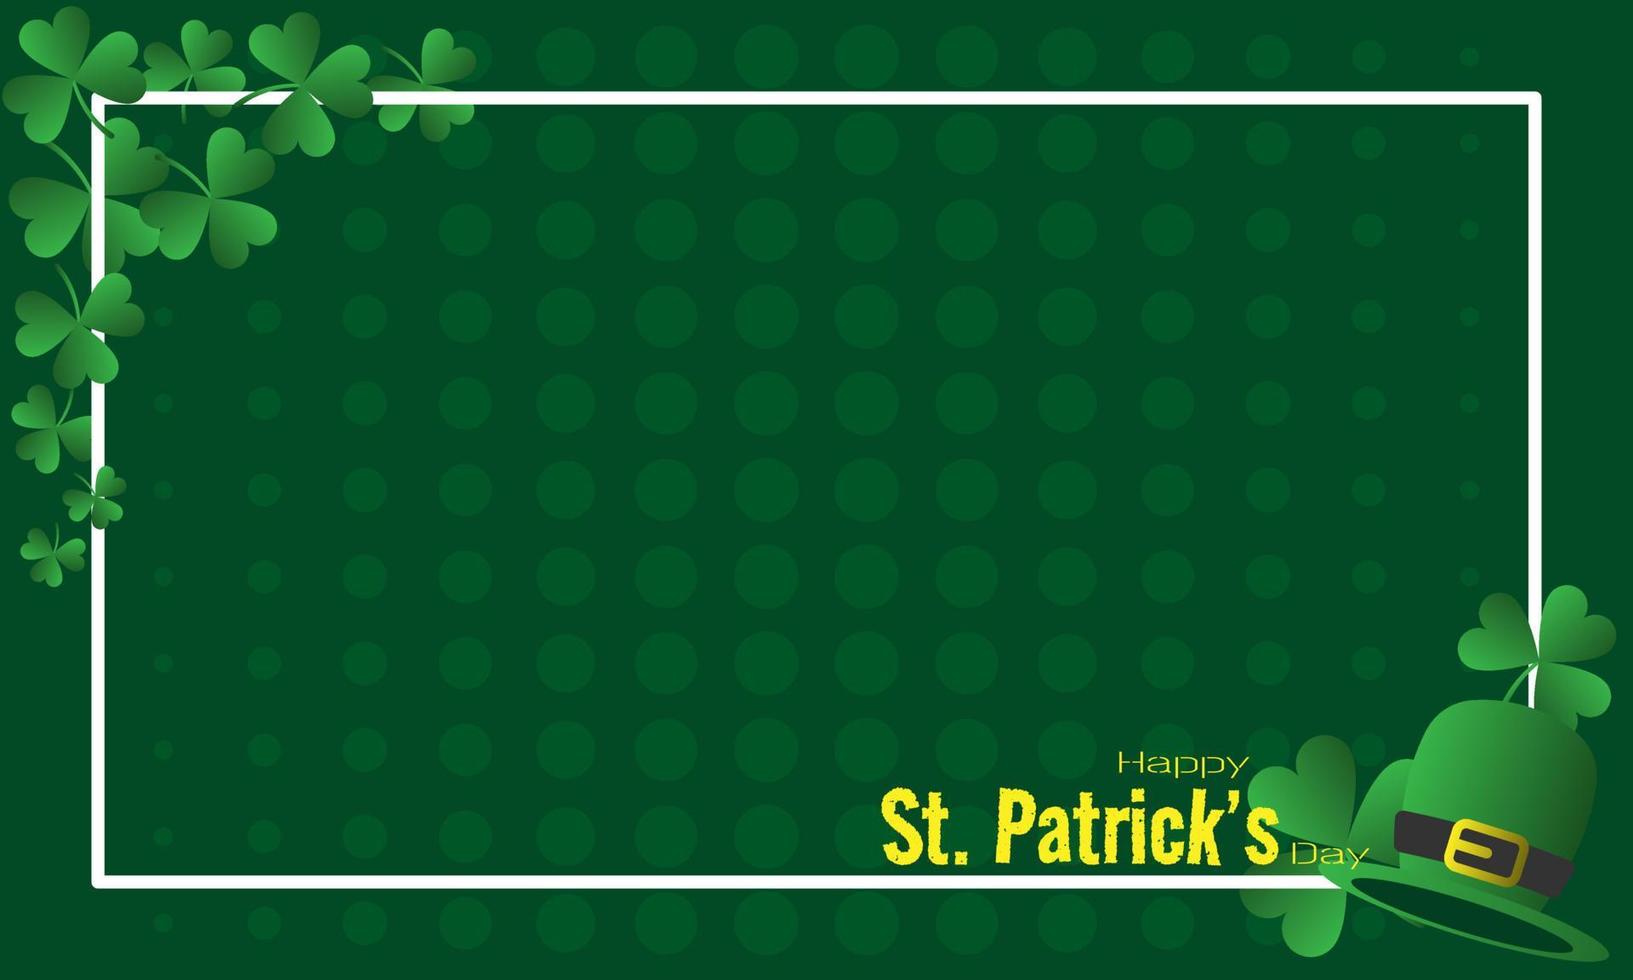 Happy Saint Patrick's Day background with copy space area vector